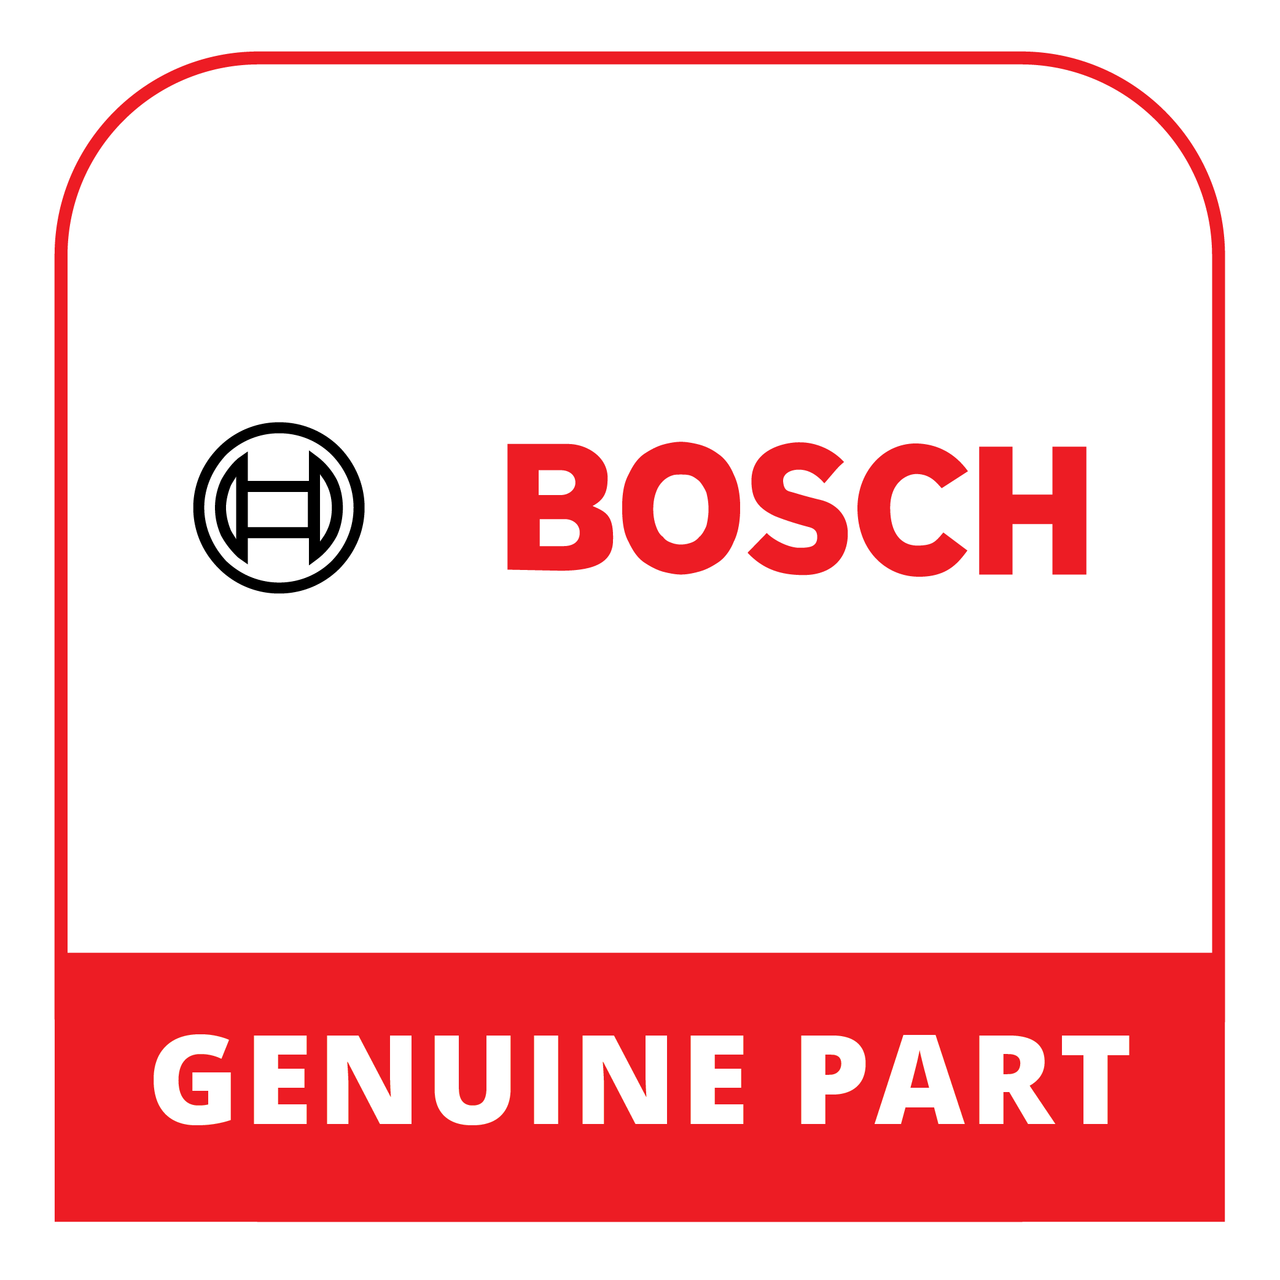 Bosch (Thermador) 00312195 - Cleaner - Genuine Bosch (Thermador) Part